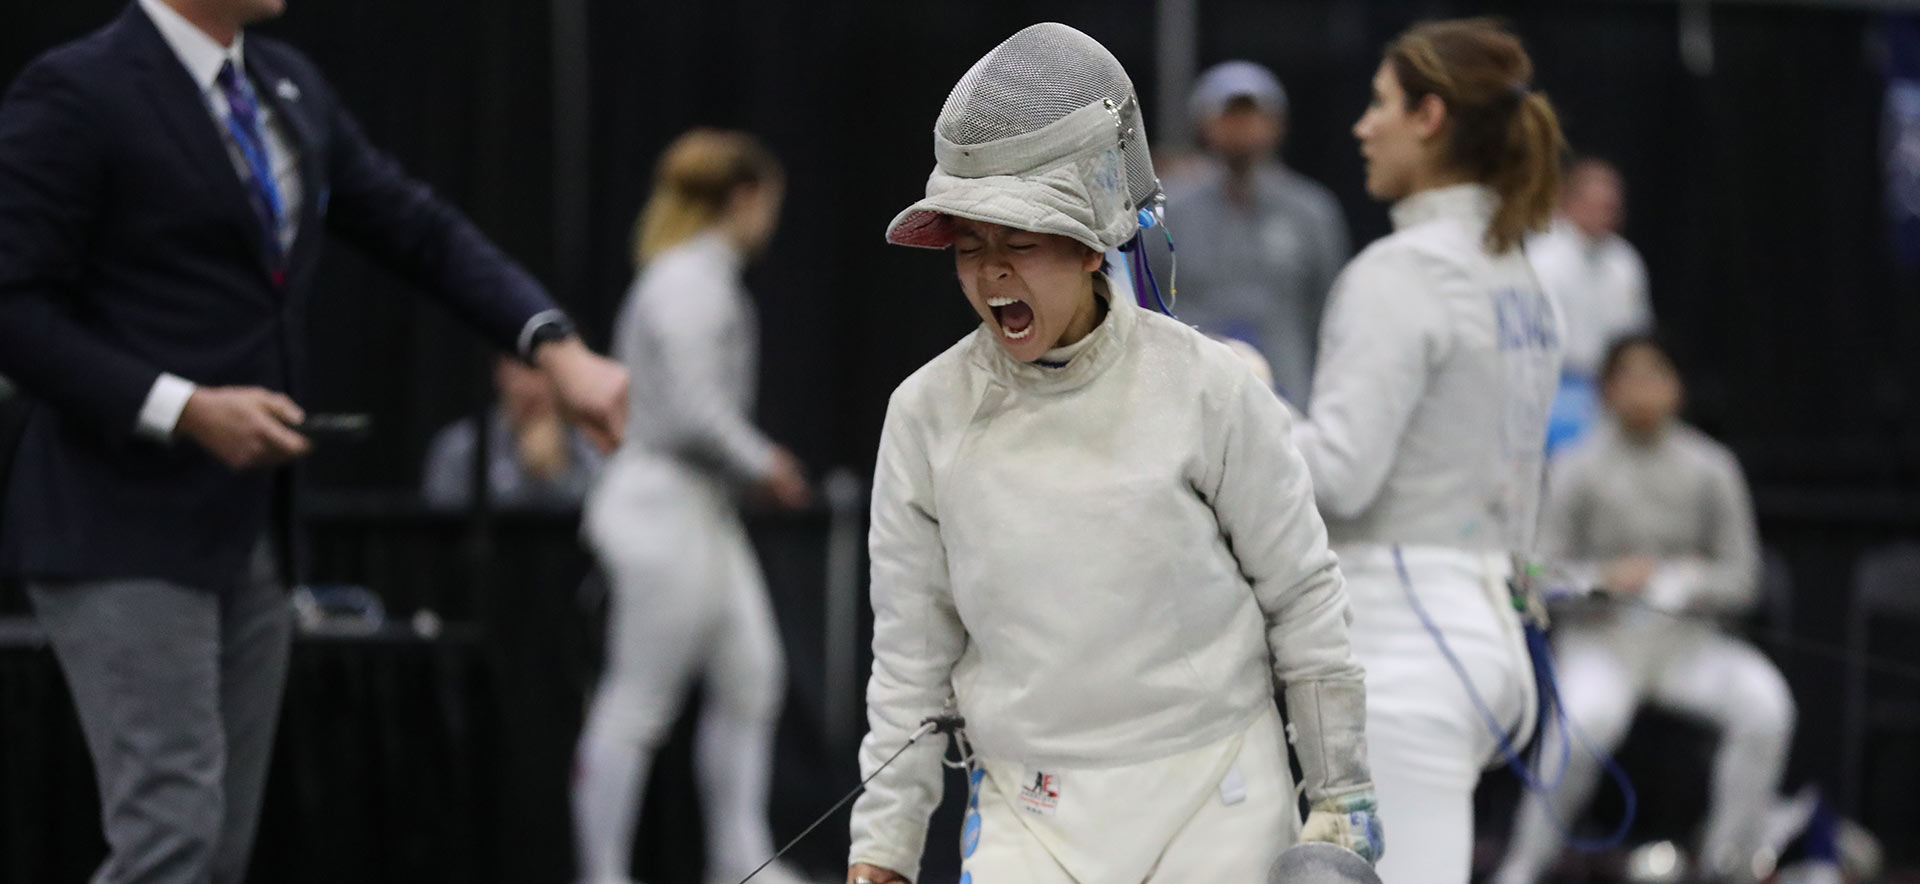 Maggie dressed in her fencing uniform. Photo Credit: Ricky Bassman